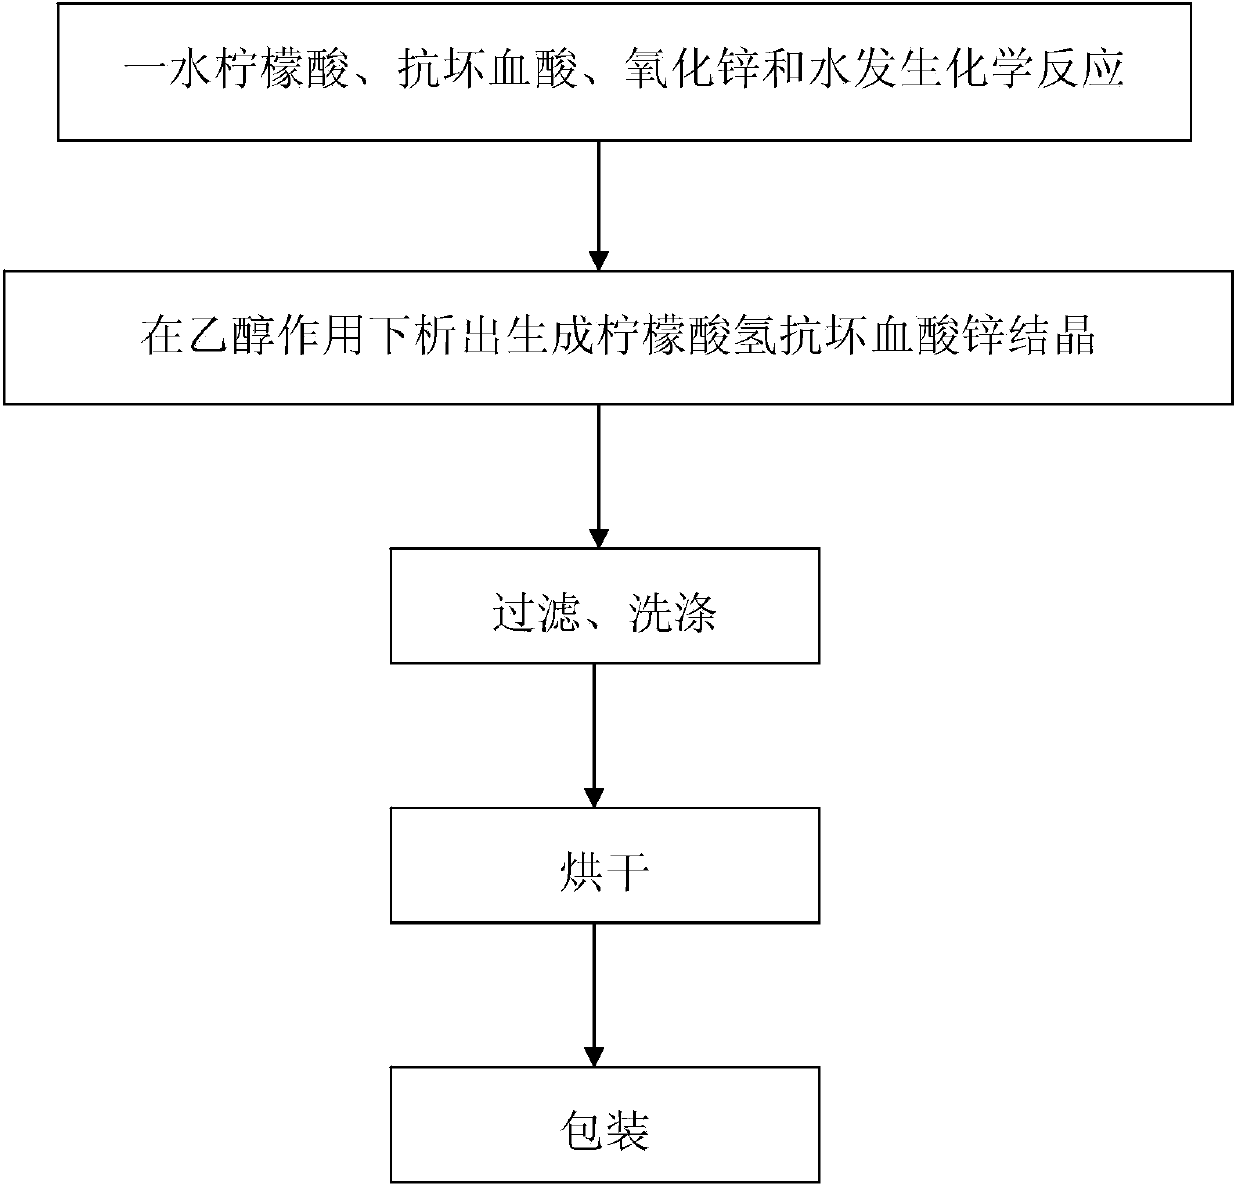 Zinc ascorbate hydrogen citrate, as well as preparation method and application thereof